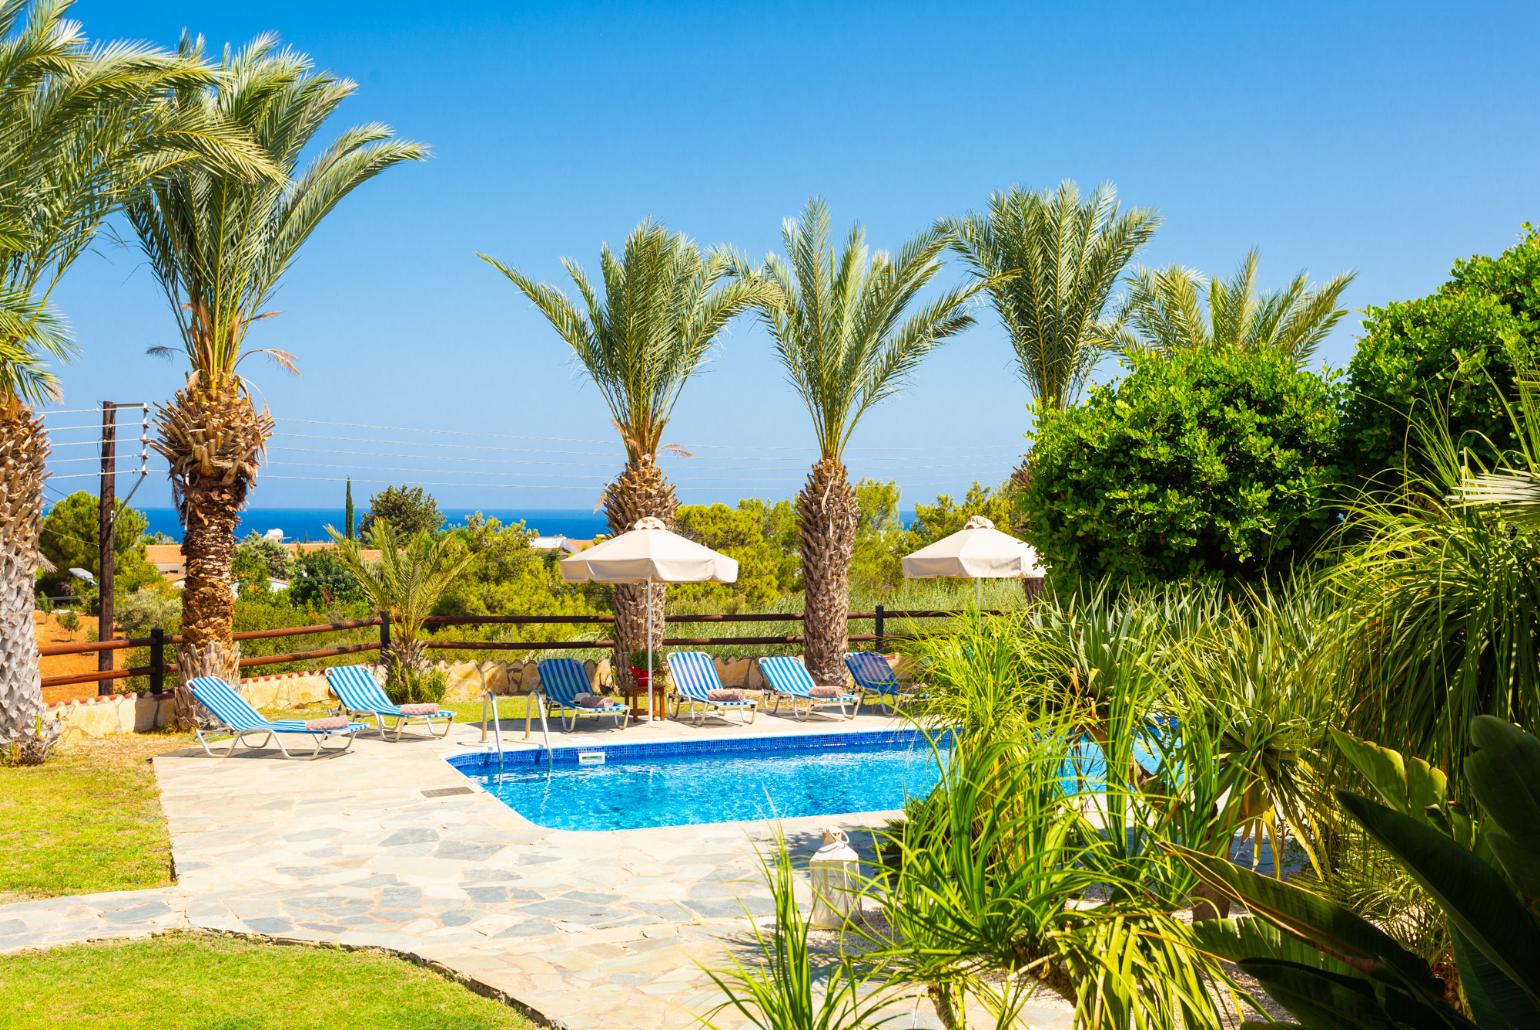 Private pool and terrace with sea views